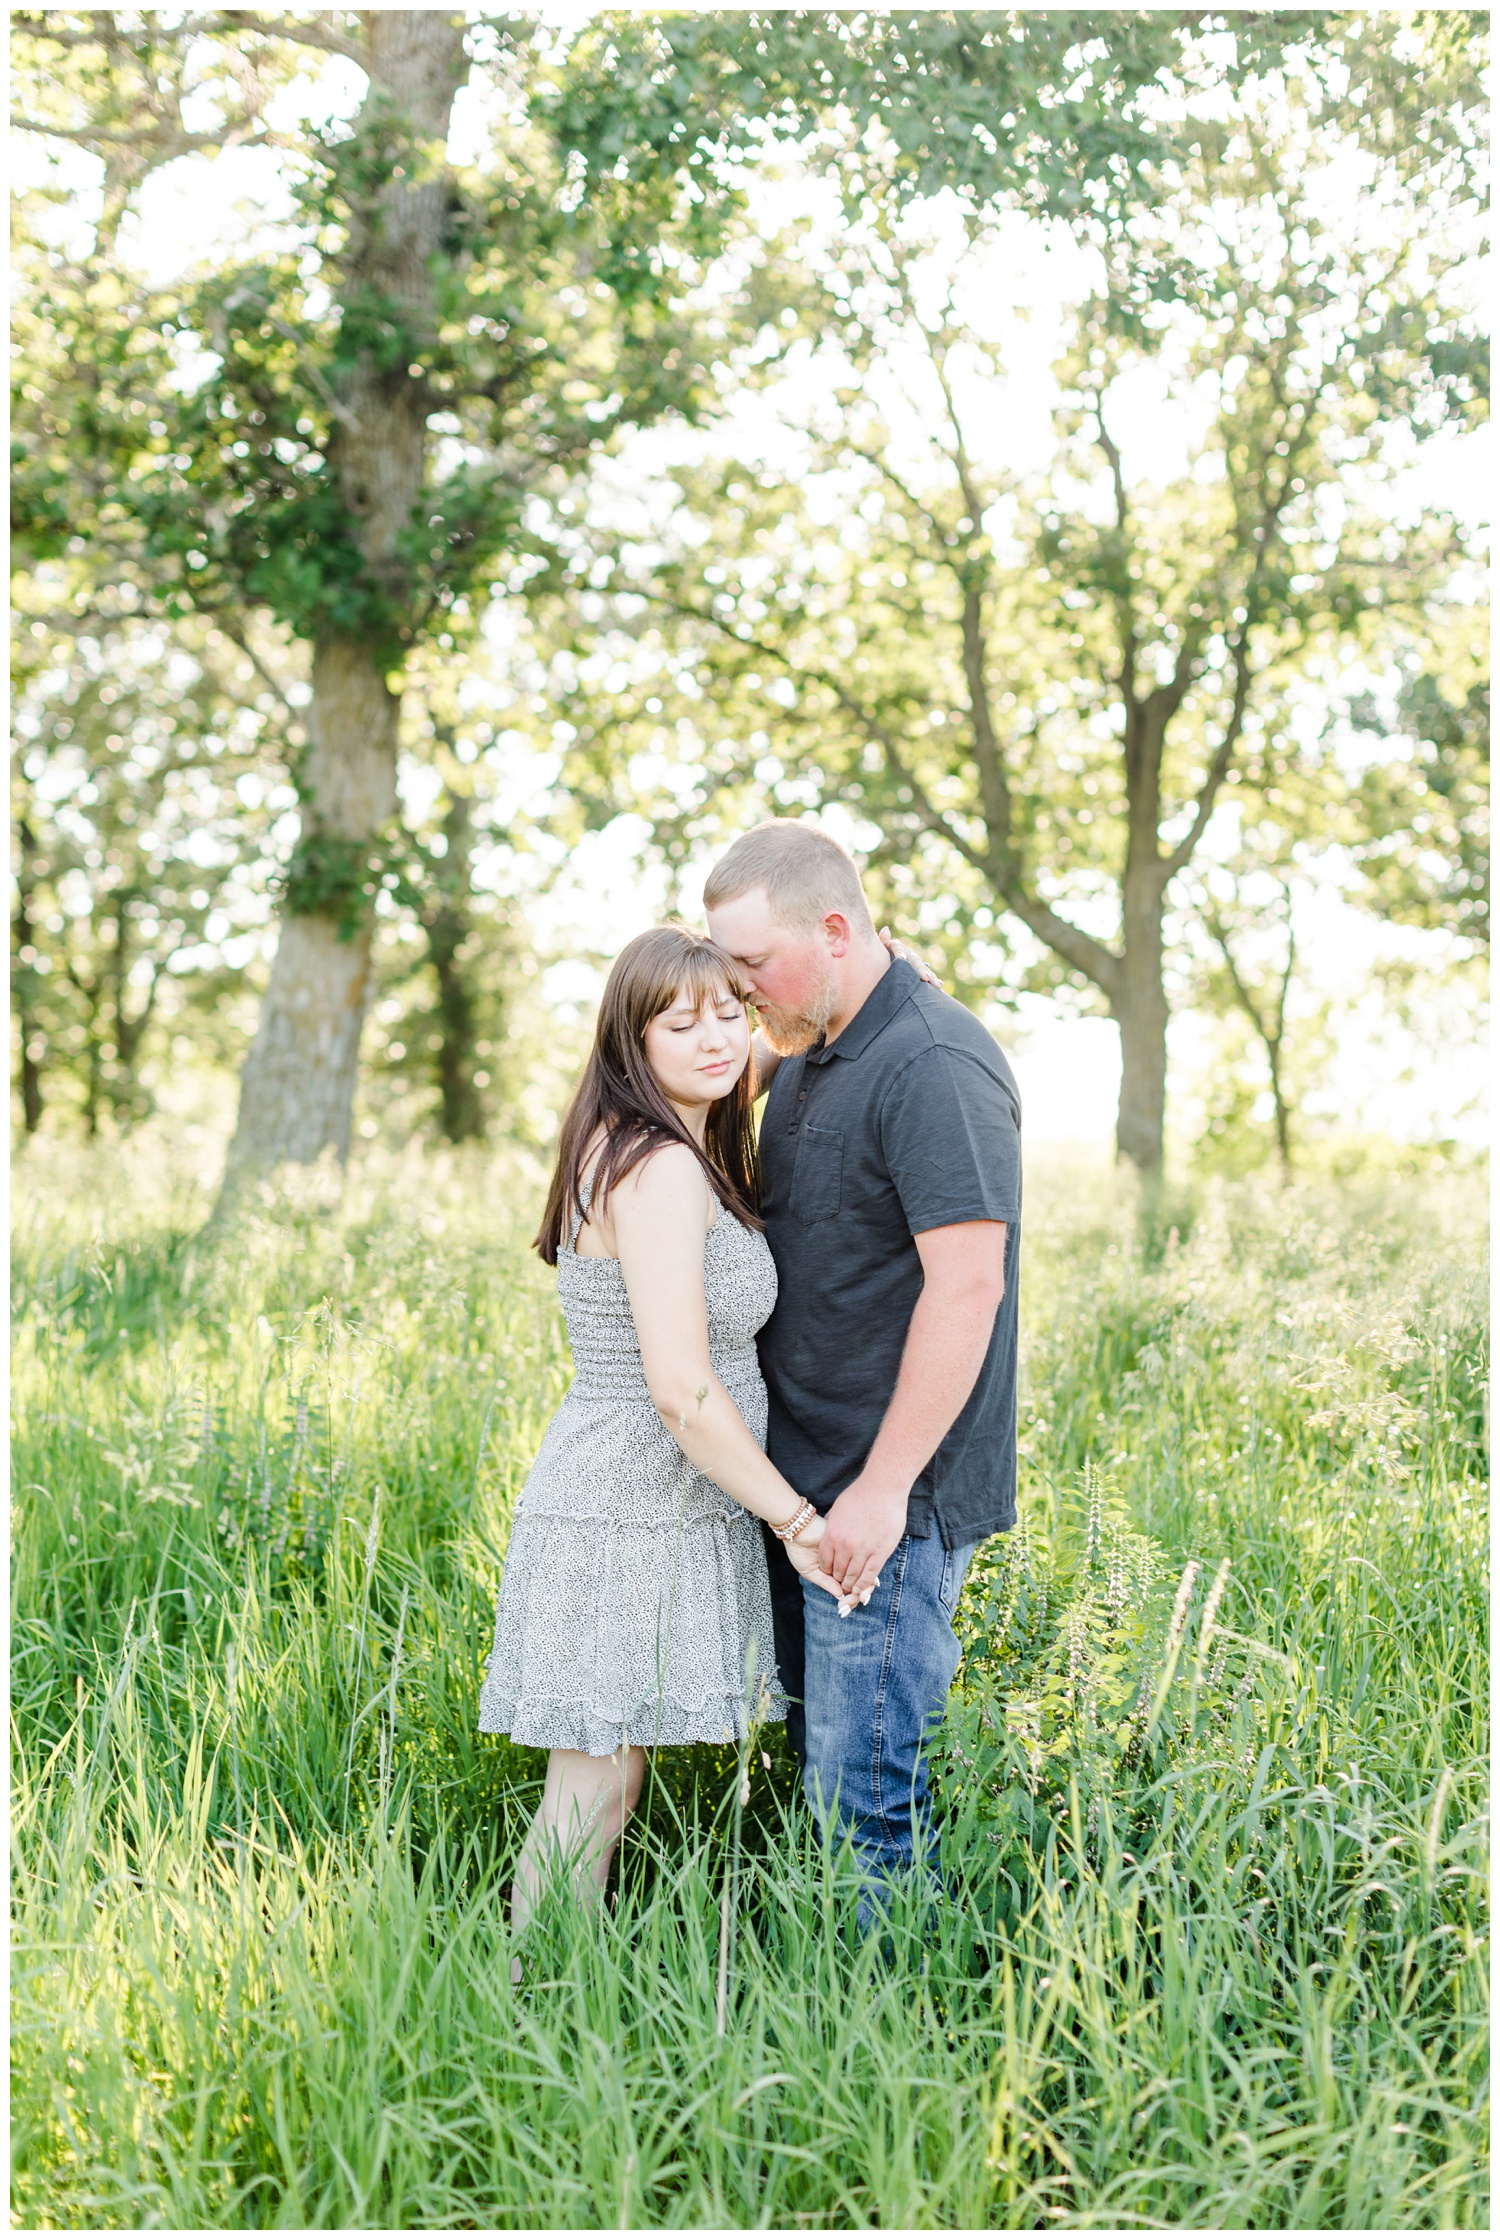 Jeremiah nuzzles Madeline in a grassy pasture in Iowa | CB Studio